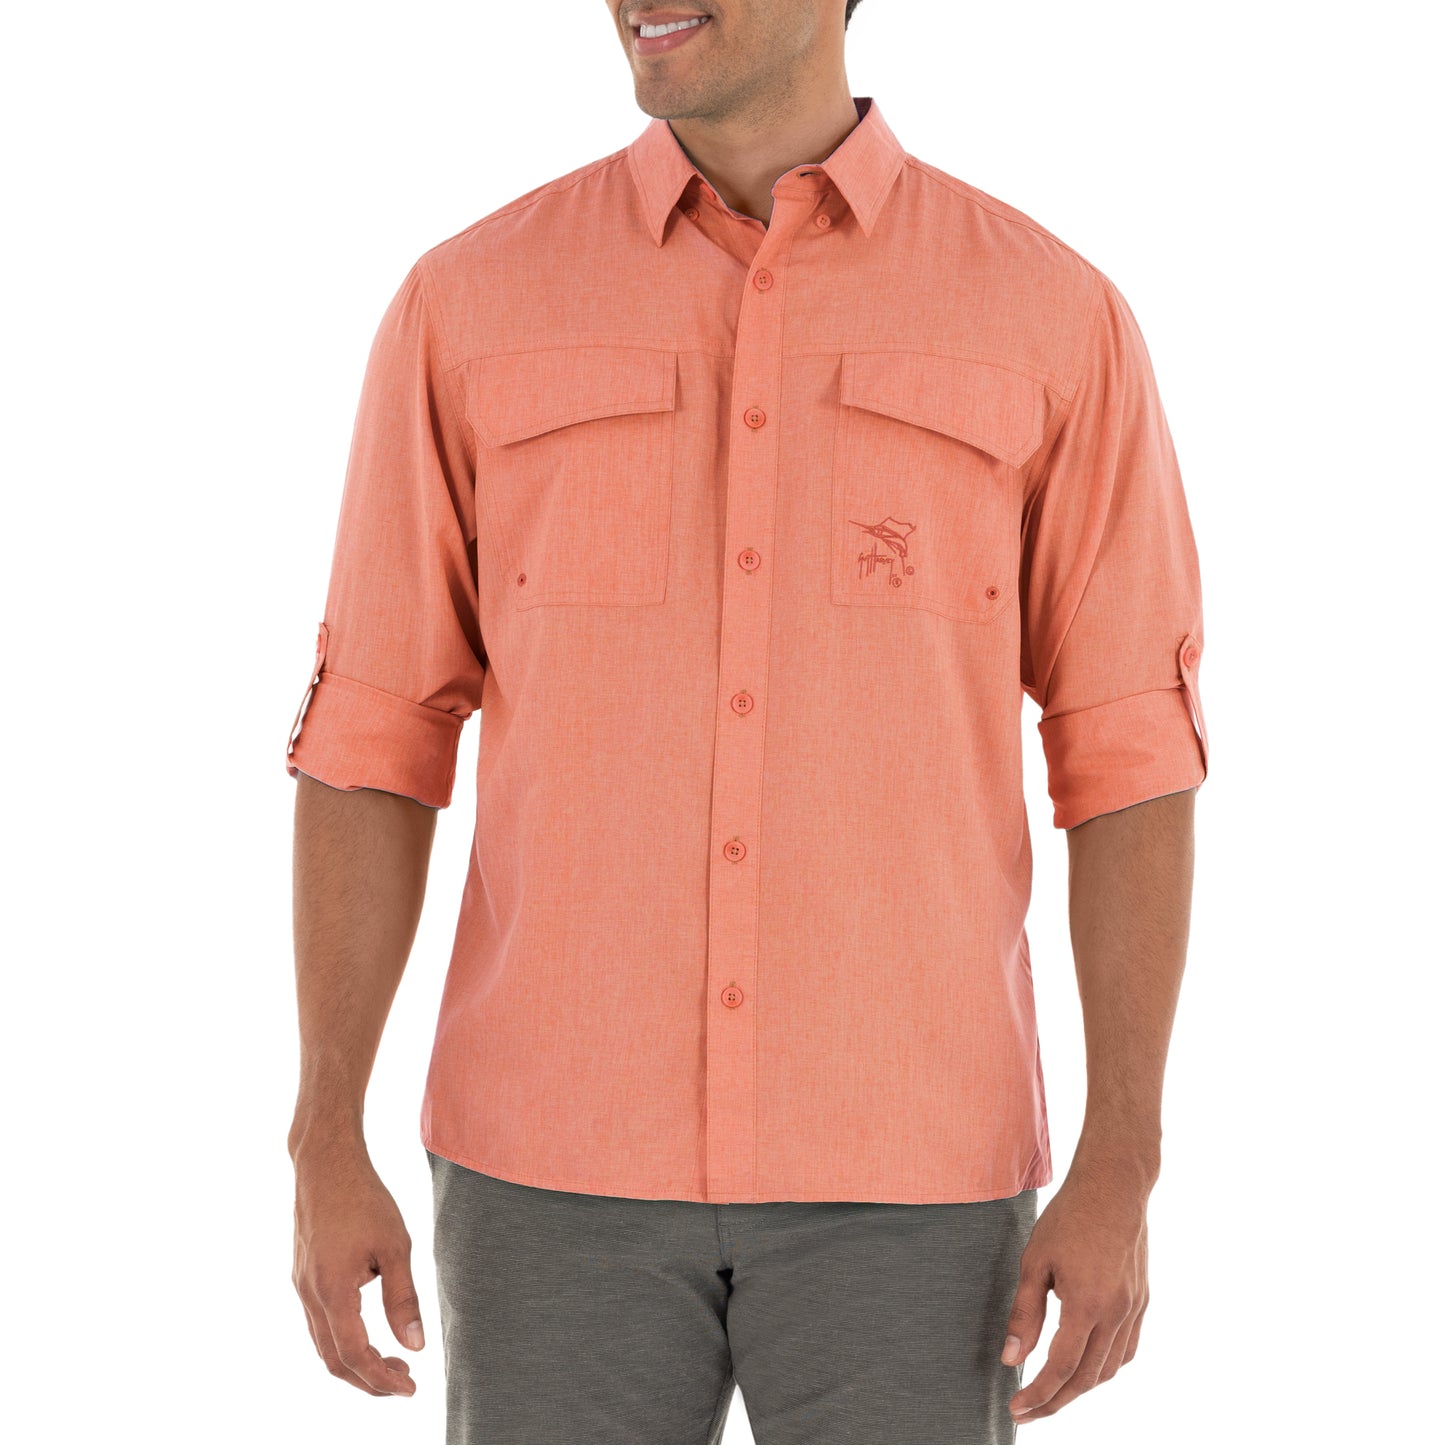 Men's Long Sleeve Heather Textured Cationic Coral Fishing Shirt